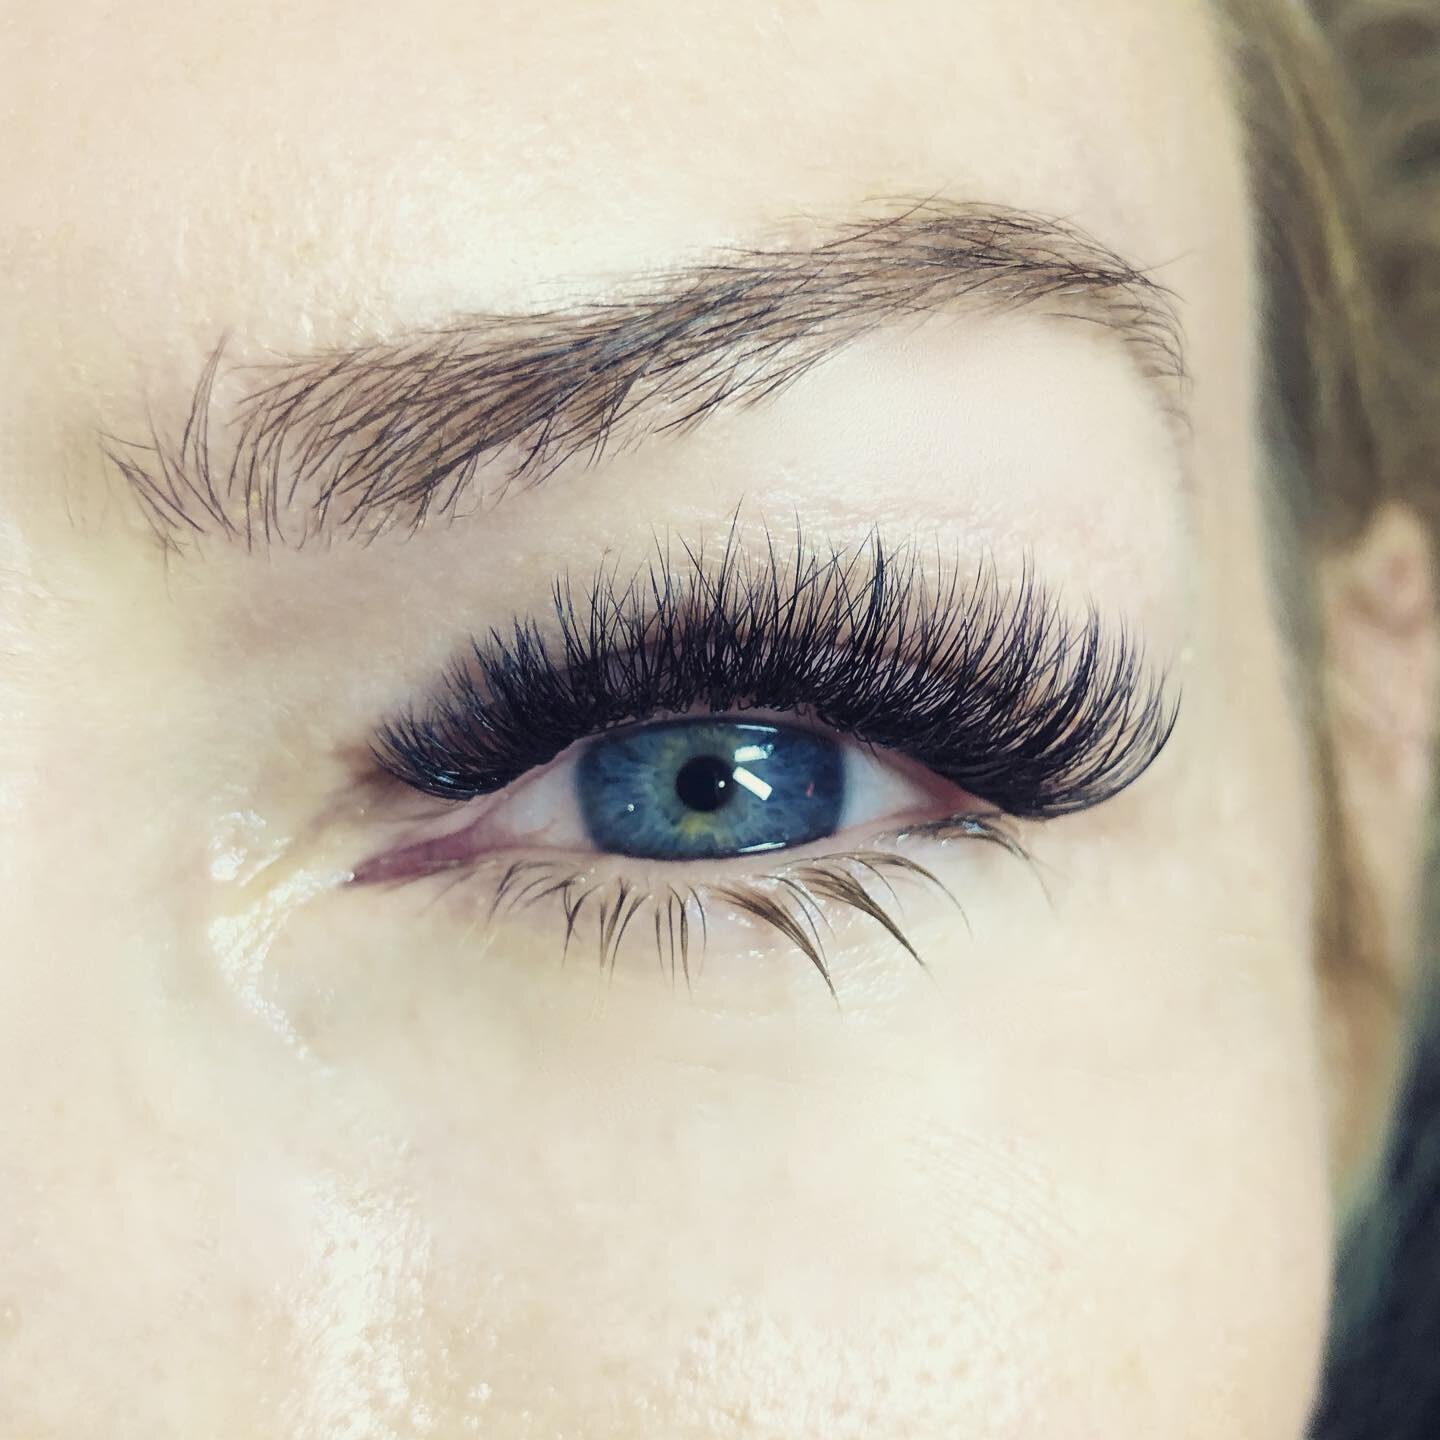 Dreamy doe-eyed lash vibes for 2021 and our new salon!

PS. Here&rsquo;s the new address, make sure to save! 

B.B. Lash Boutique
15235 W Sunset Blvd
Pacific Palisades, CA, 90272